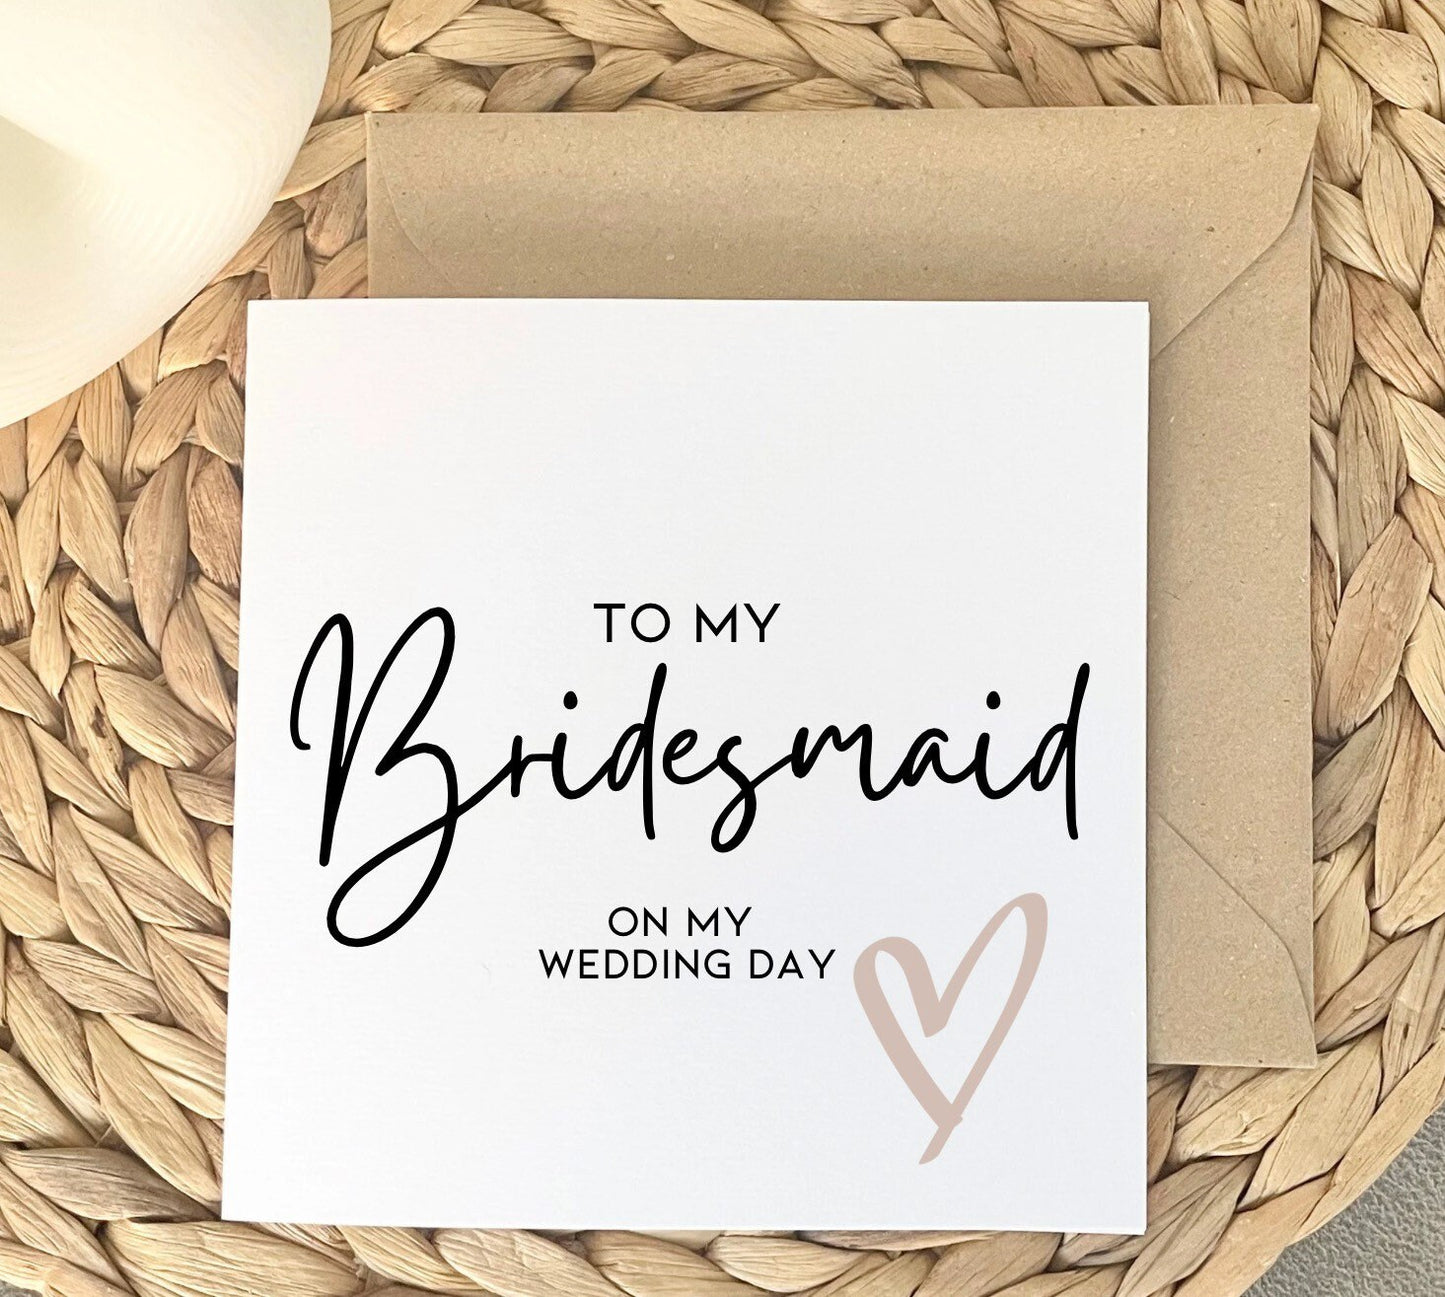 To my bridesmaid card on my wedding day, thank you bridesmaid, card for bridesmaids on wedding morning